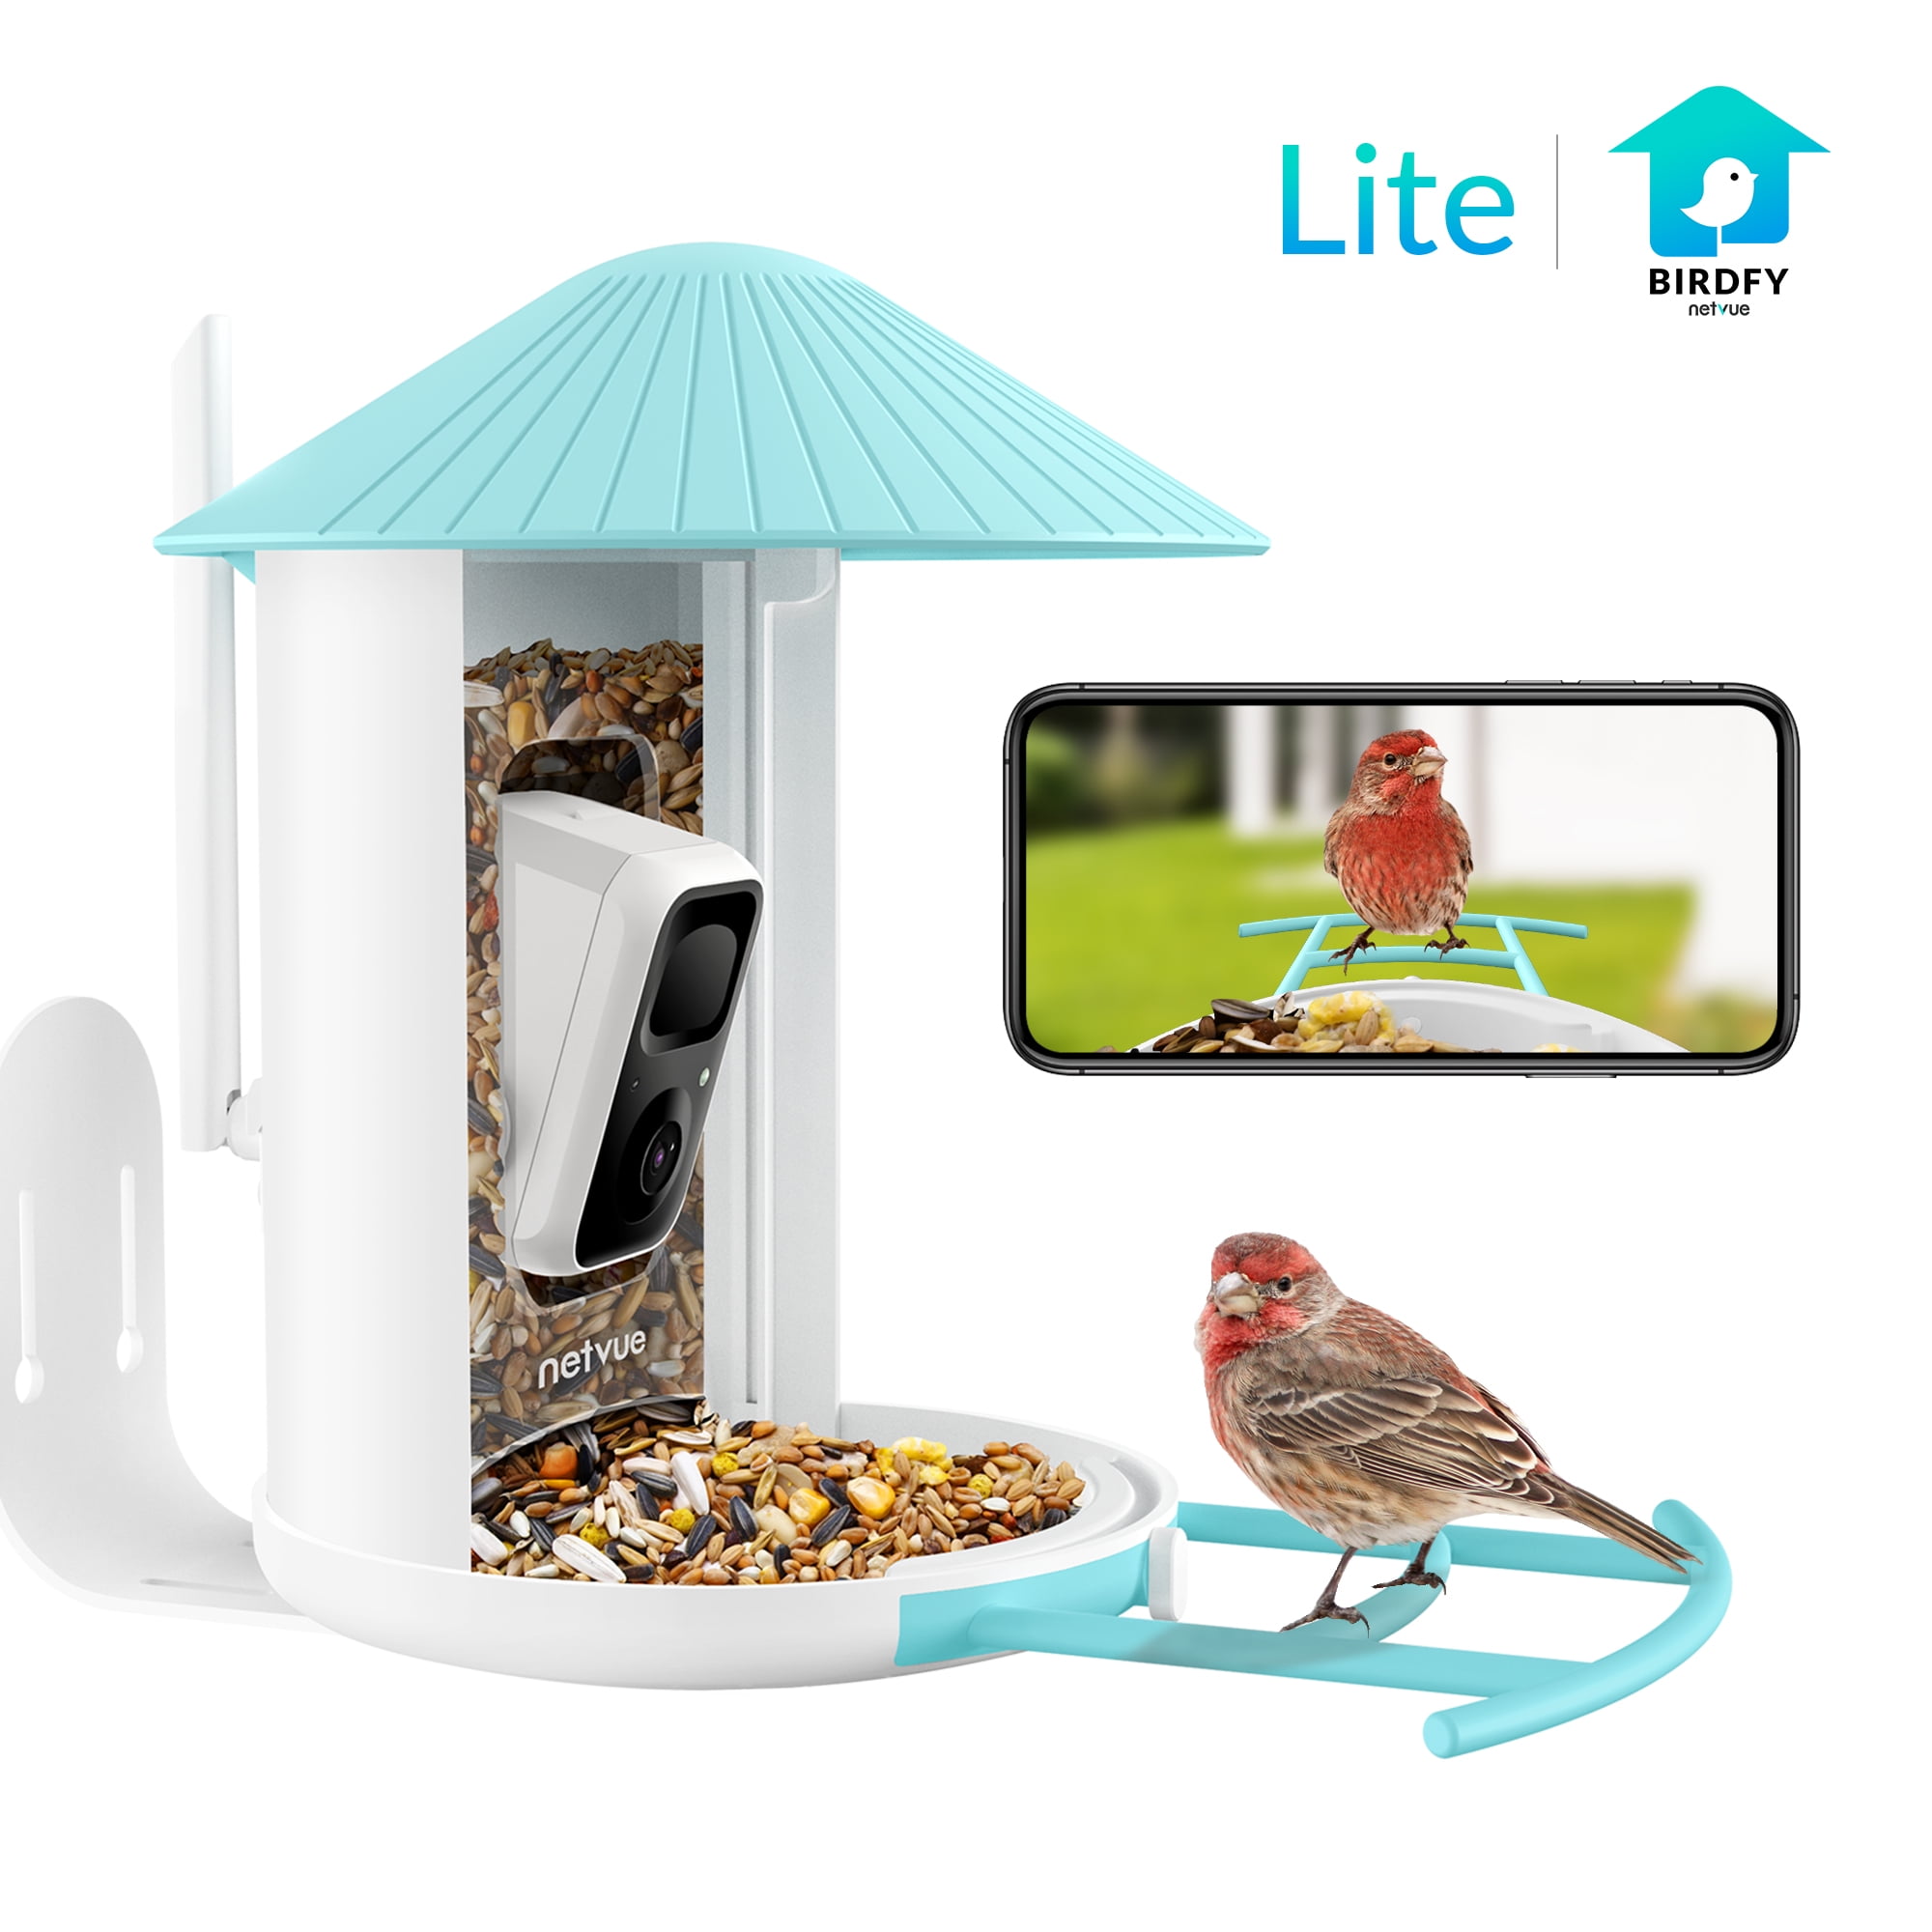 Smart Bird Feeder with Camera, Bird Watching Camera for Backyard Birding, Capture Images/Videos/Motion Detection with APP Notification AI Recognition for Bird Lover, Gift Ideas for Dads (Birdfy Lite)